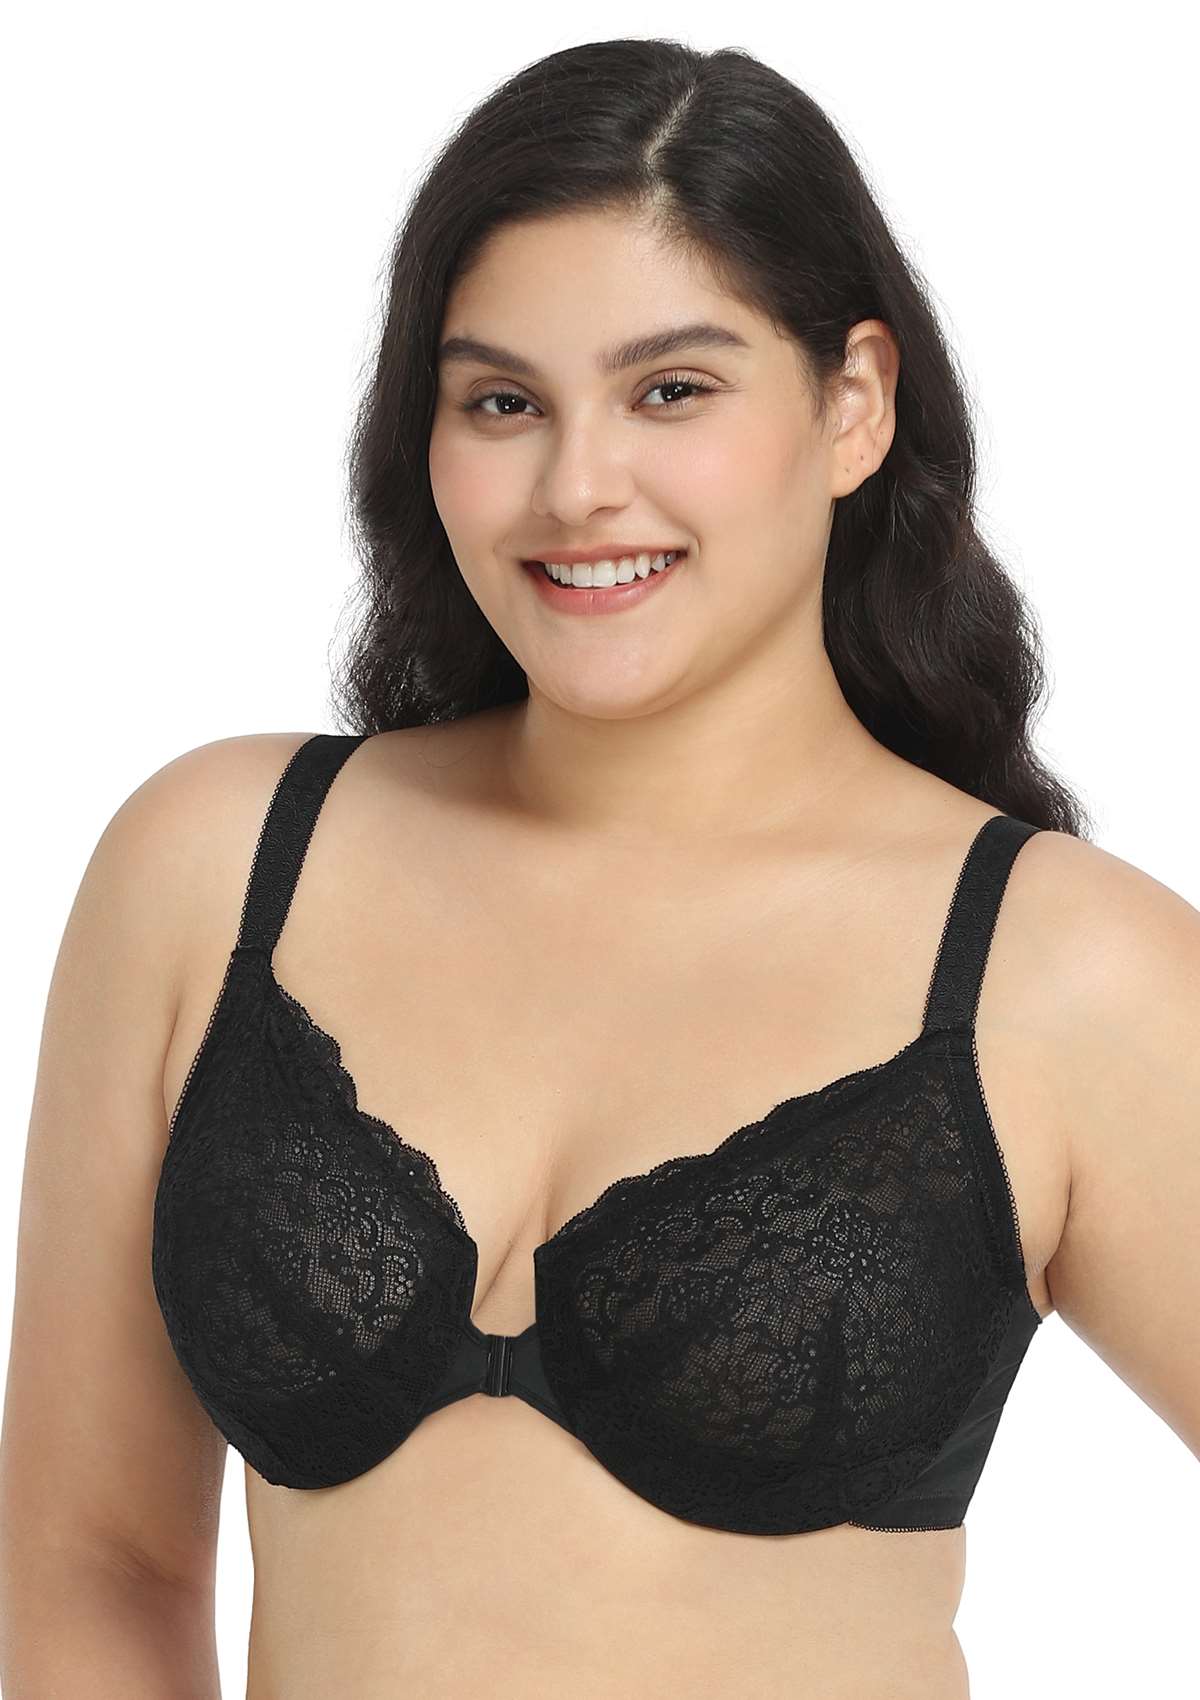 HSIA Nymphaea Front-Close Unlined Retro Floral Lace Back Smoothing Bra - Black / 38 / D